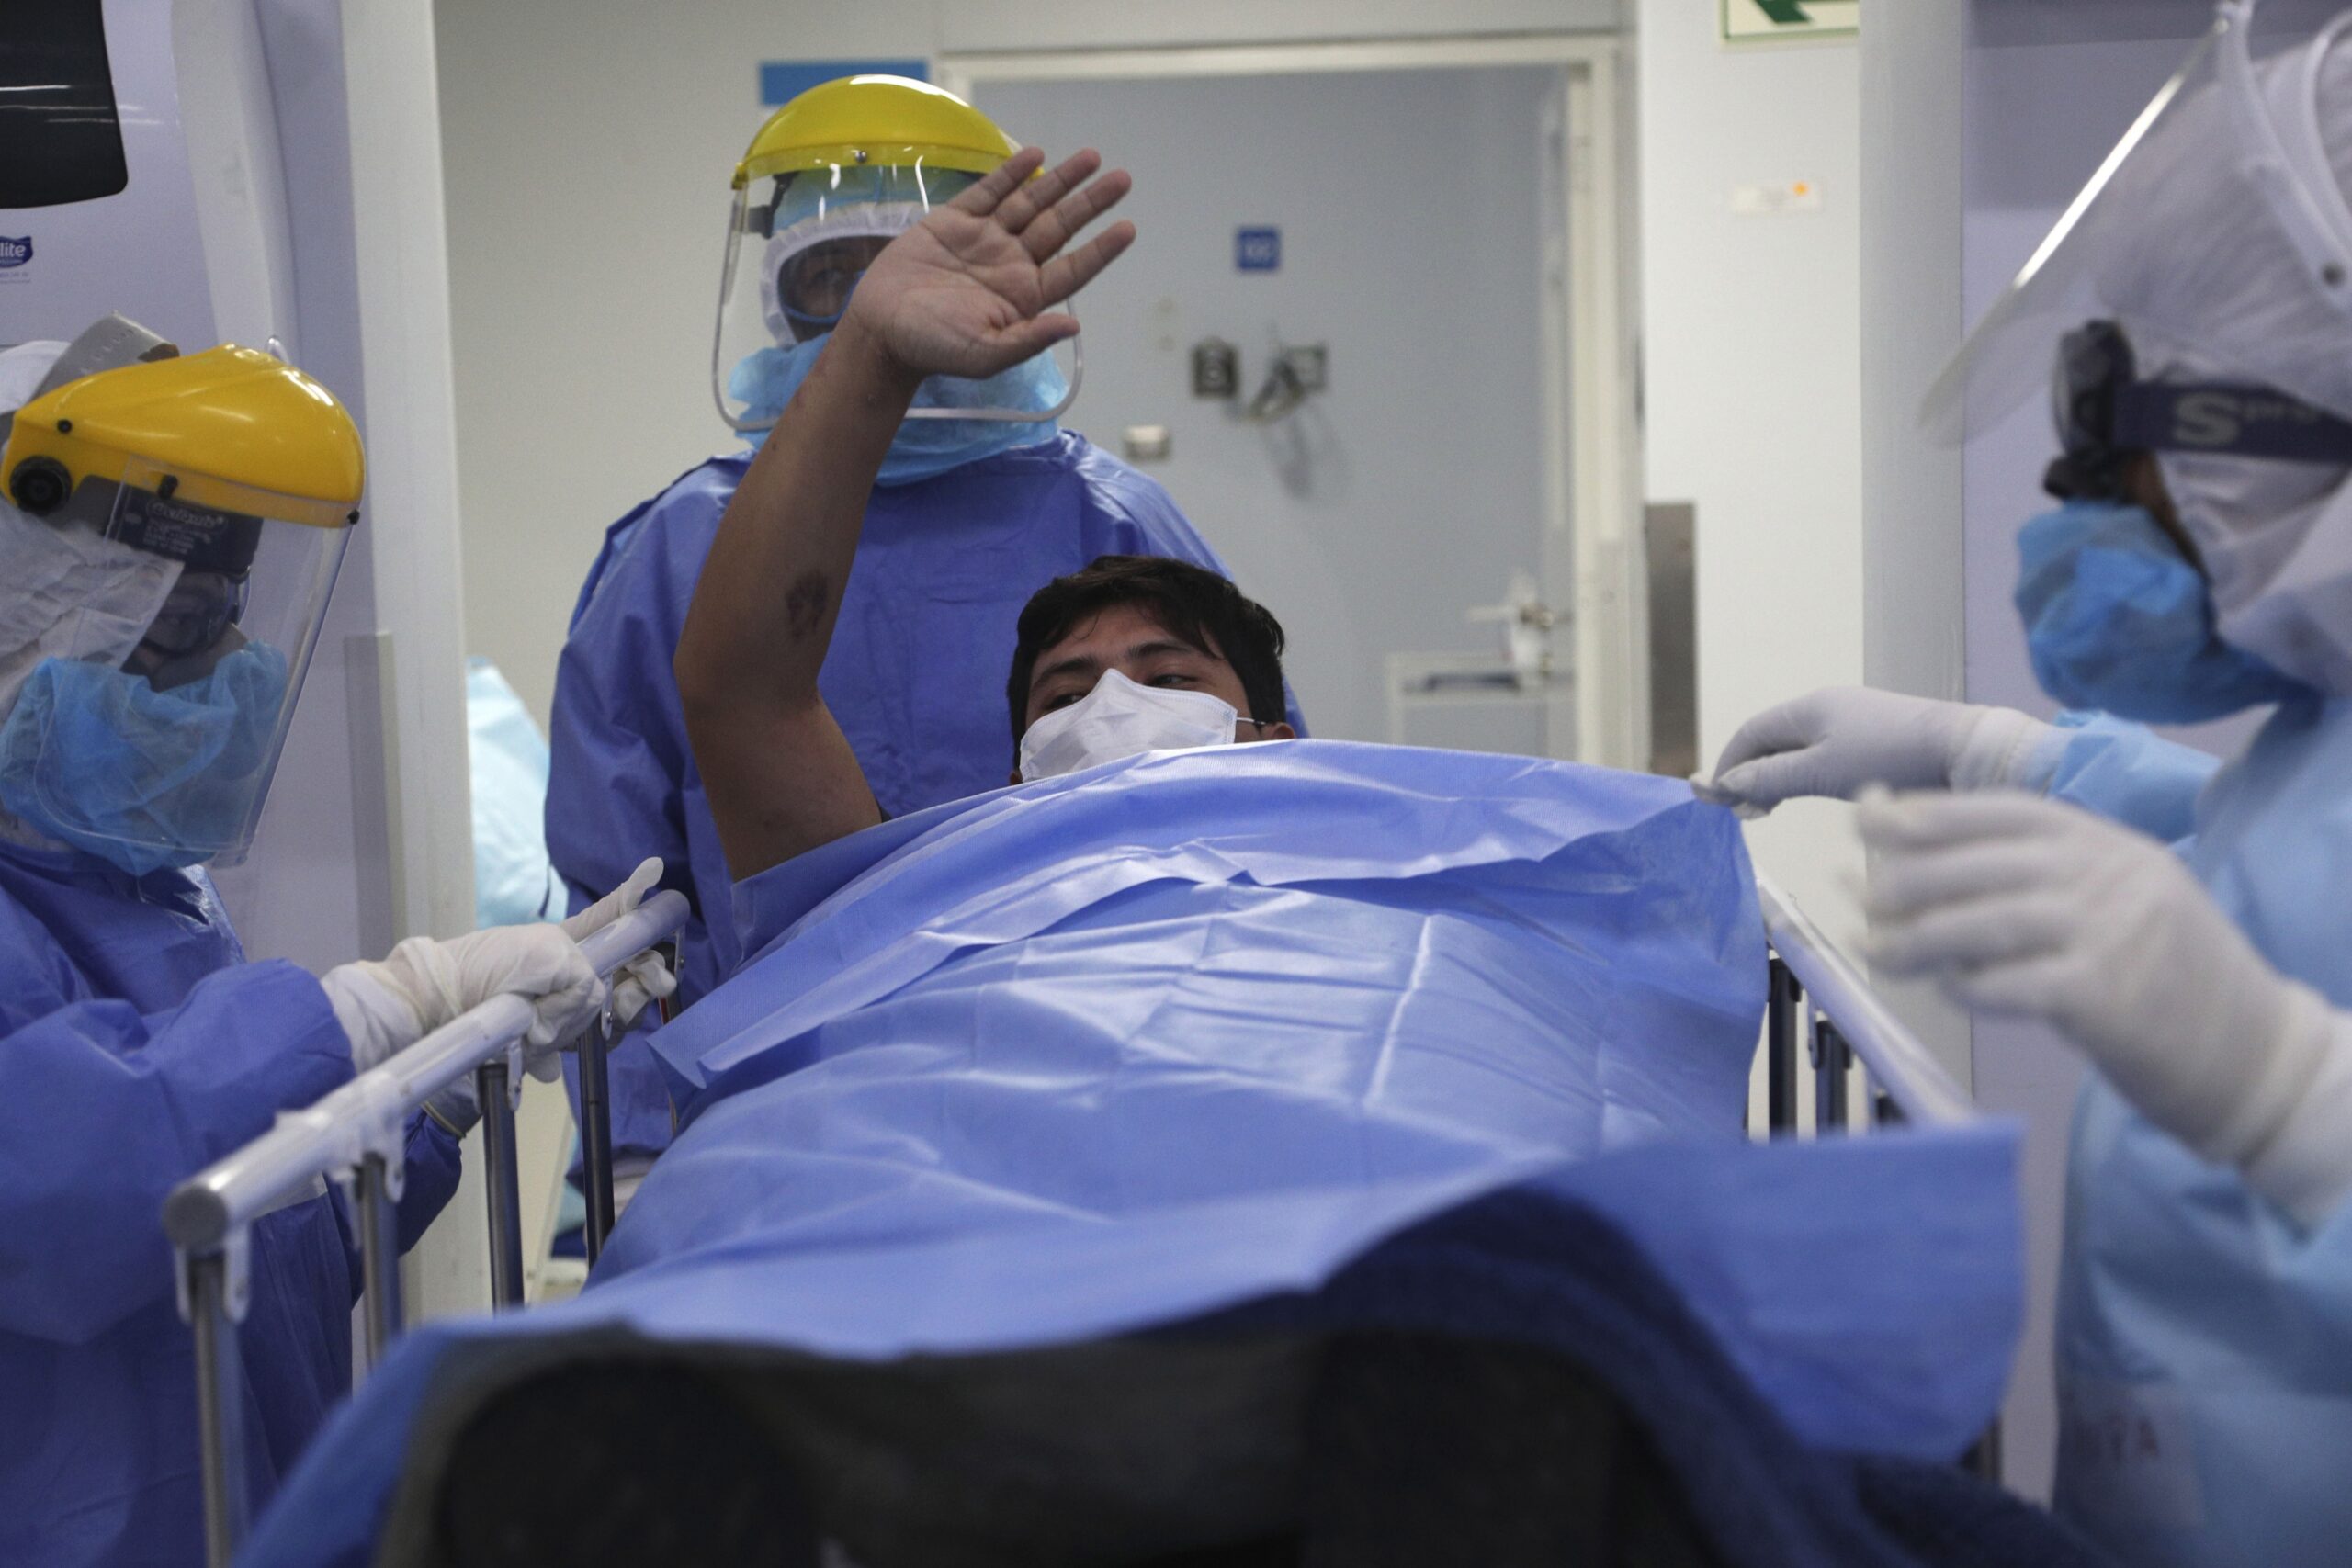 A patient waves goodbye to other patients as he is taken out of the intensive care unit for COVID-19 cases